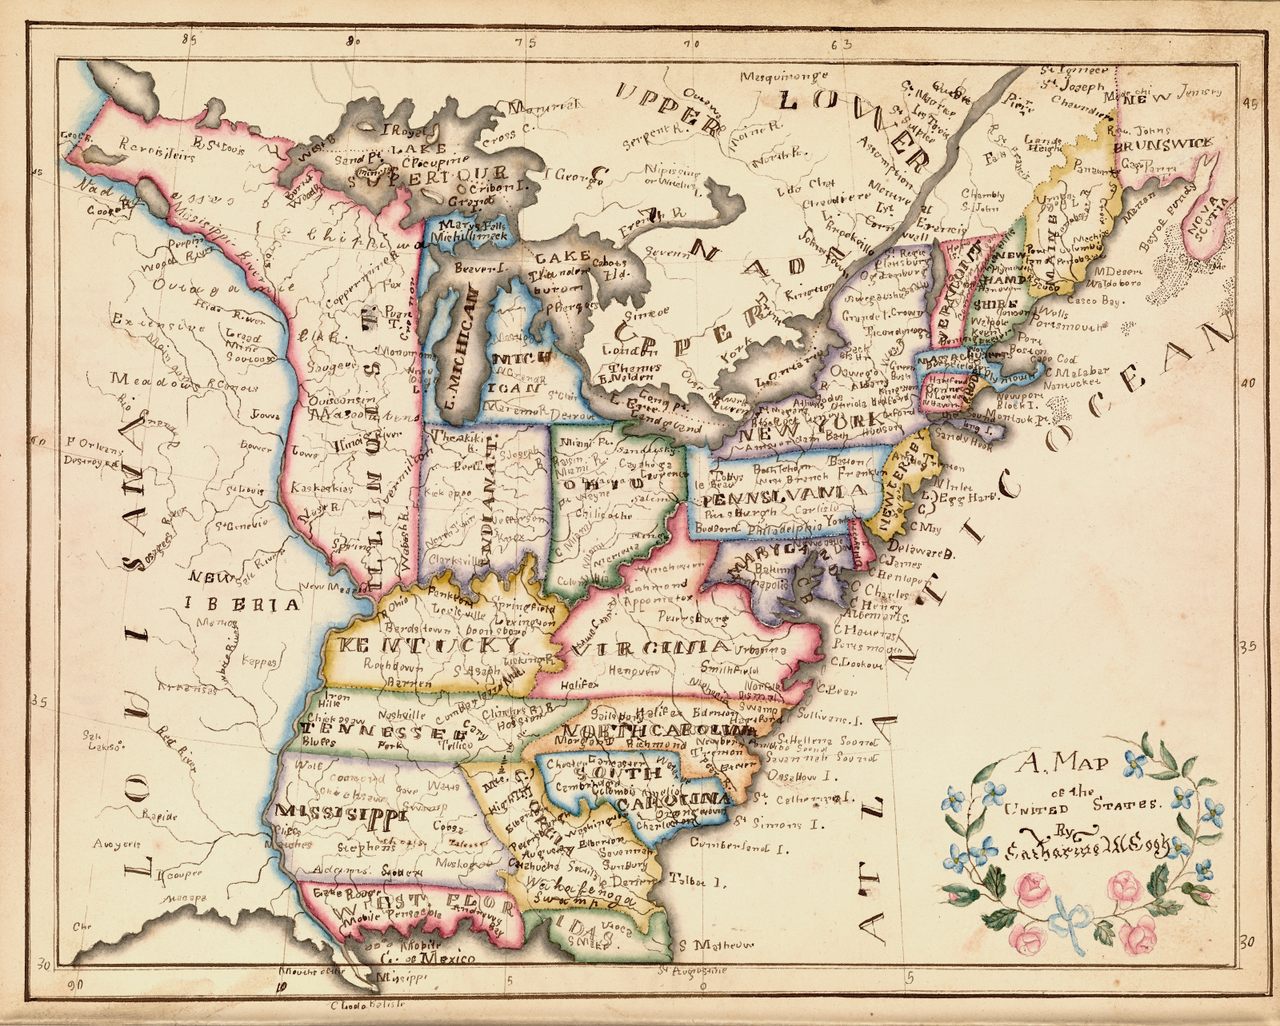 "A Map of the United States," from Catharine M. Cook's <em>Book of Penmanship</em>, made in Windsor, Vermont, in 1818.